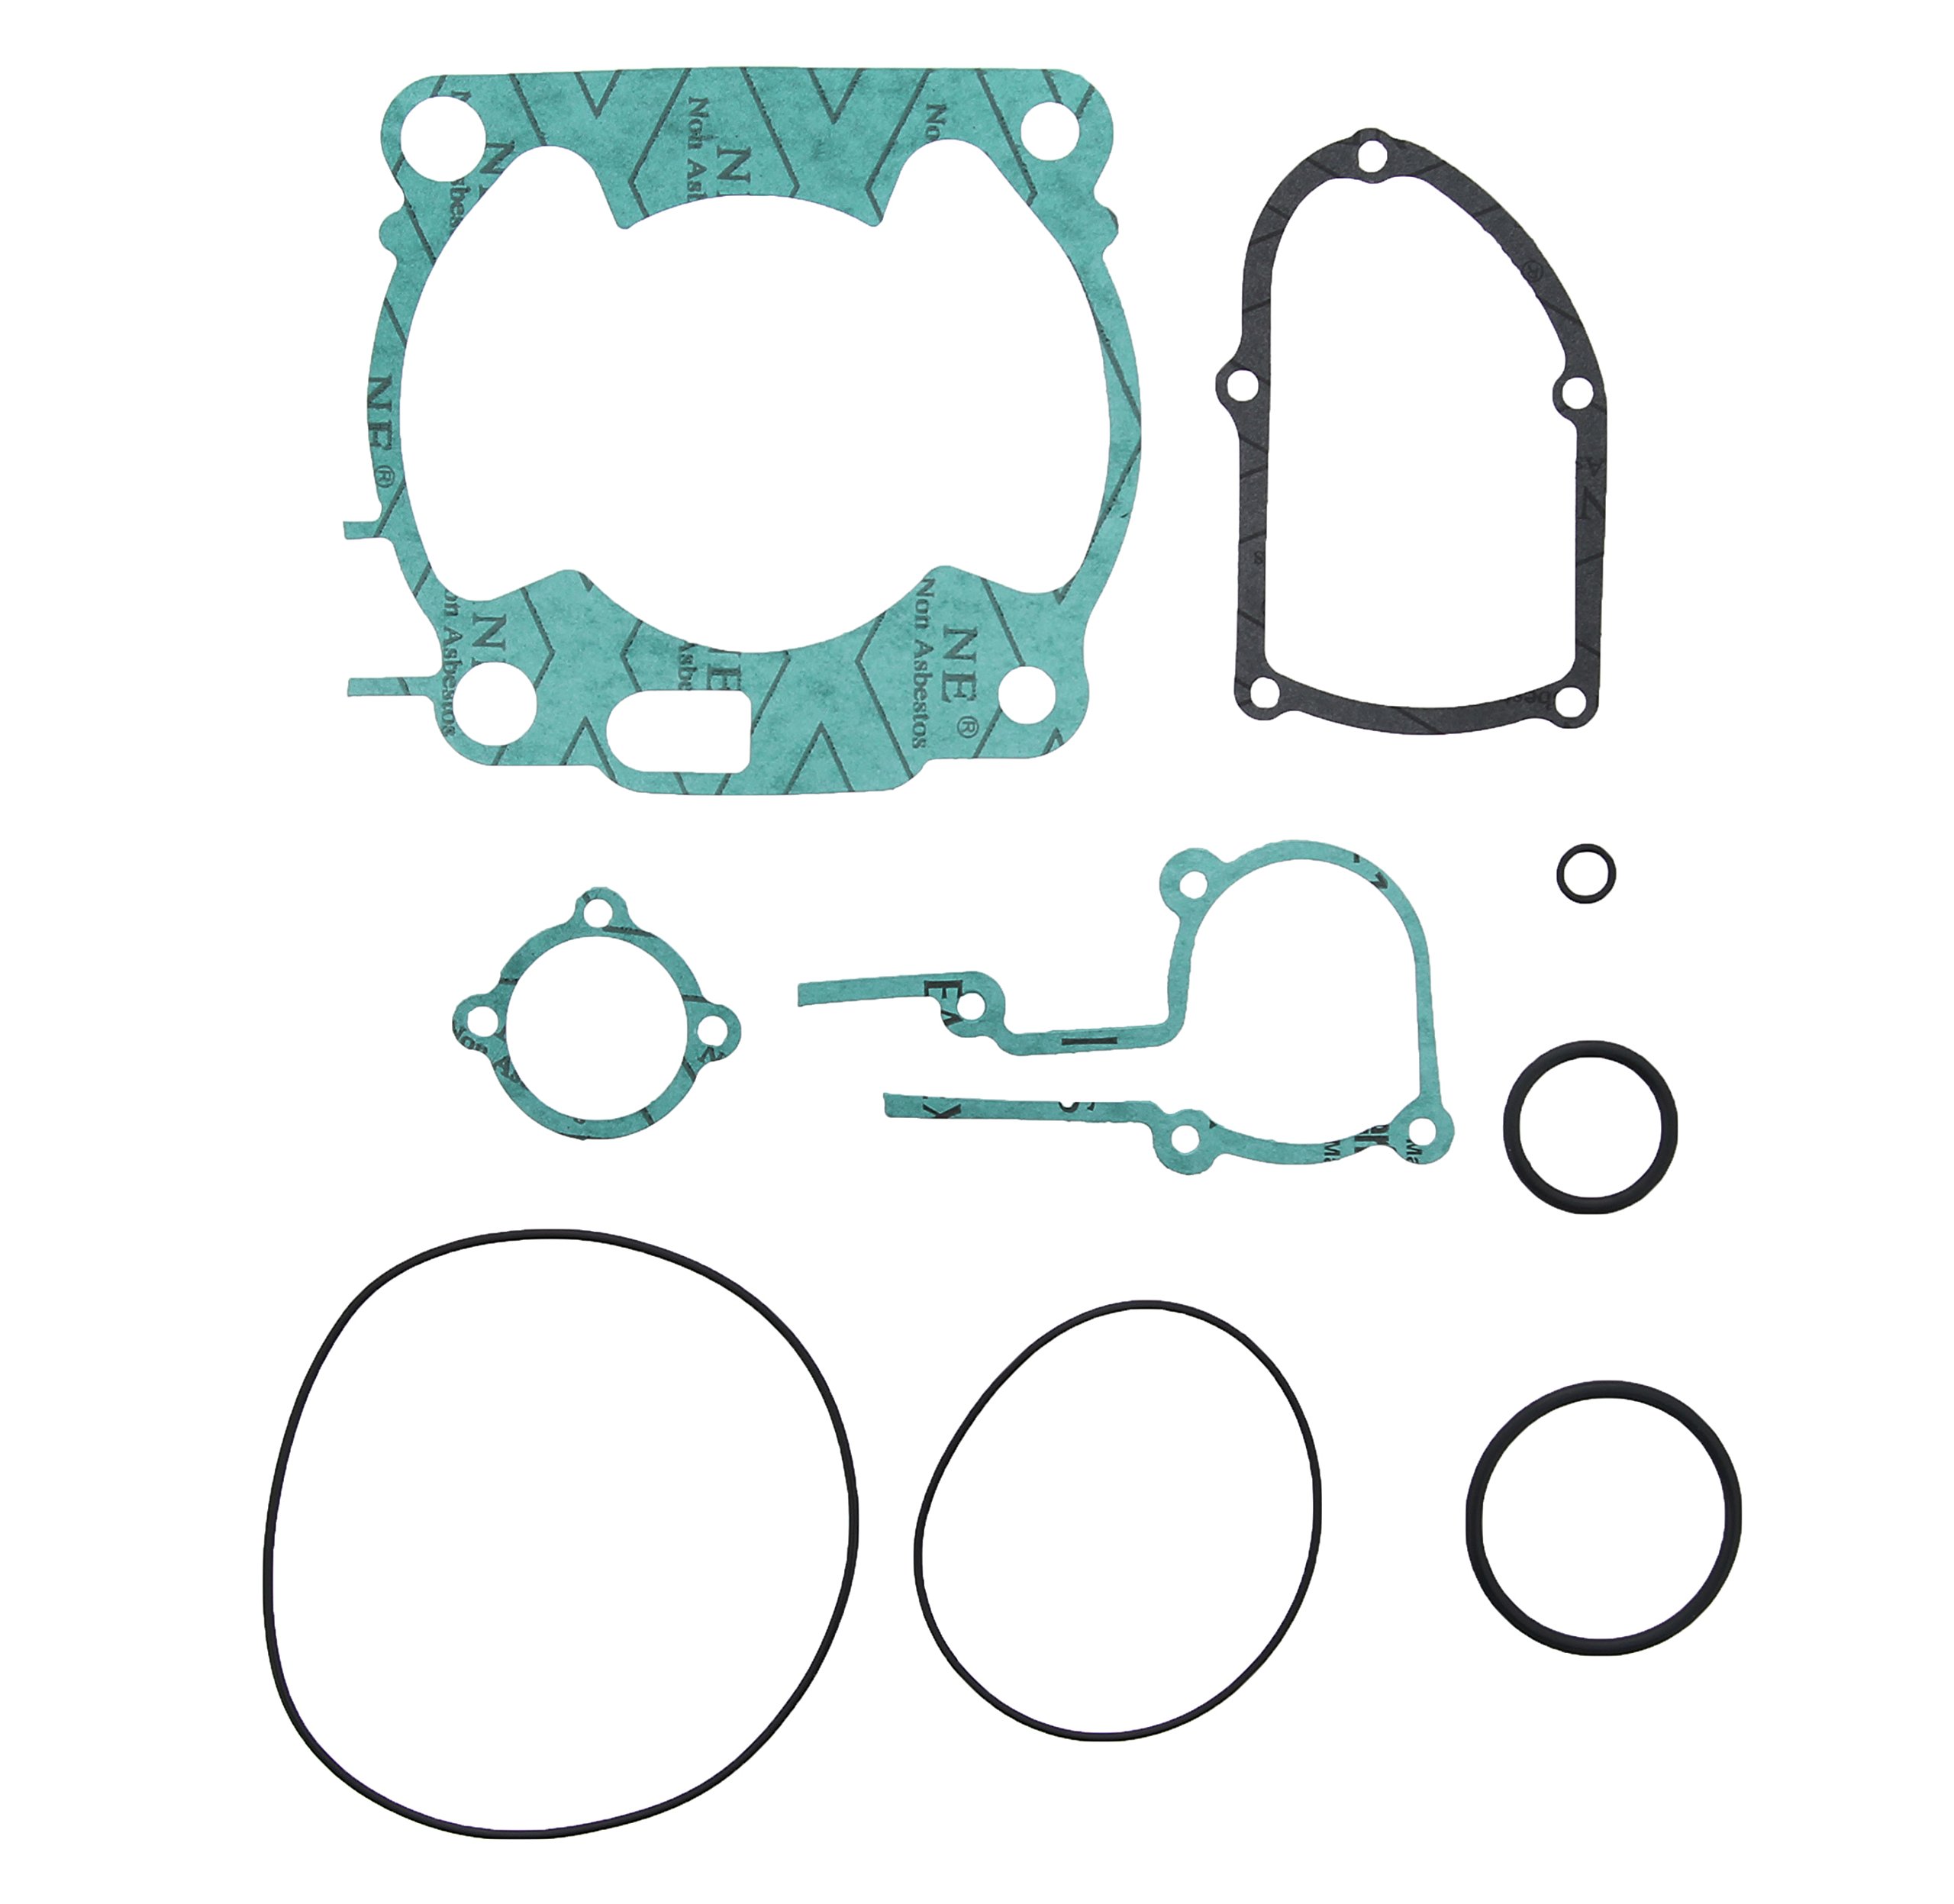 Top End Gasket Kit fits Yamaha YZ250 YZ 250 1997 1998 by Race-Driven